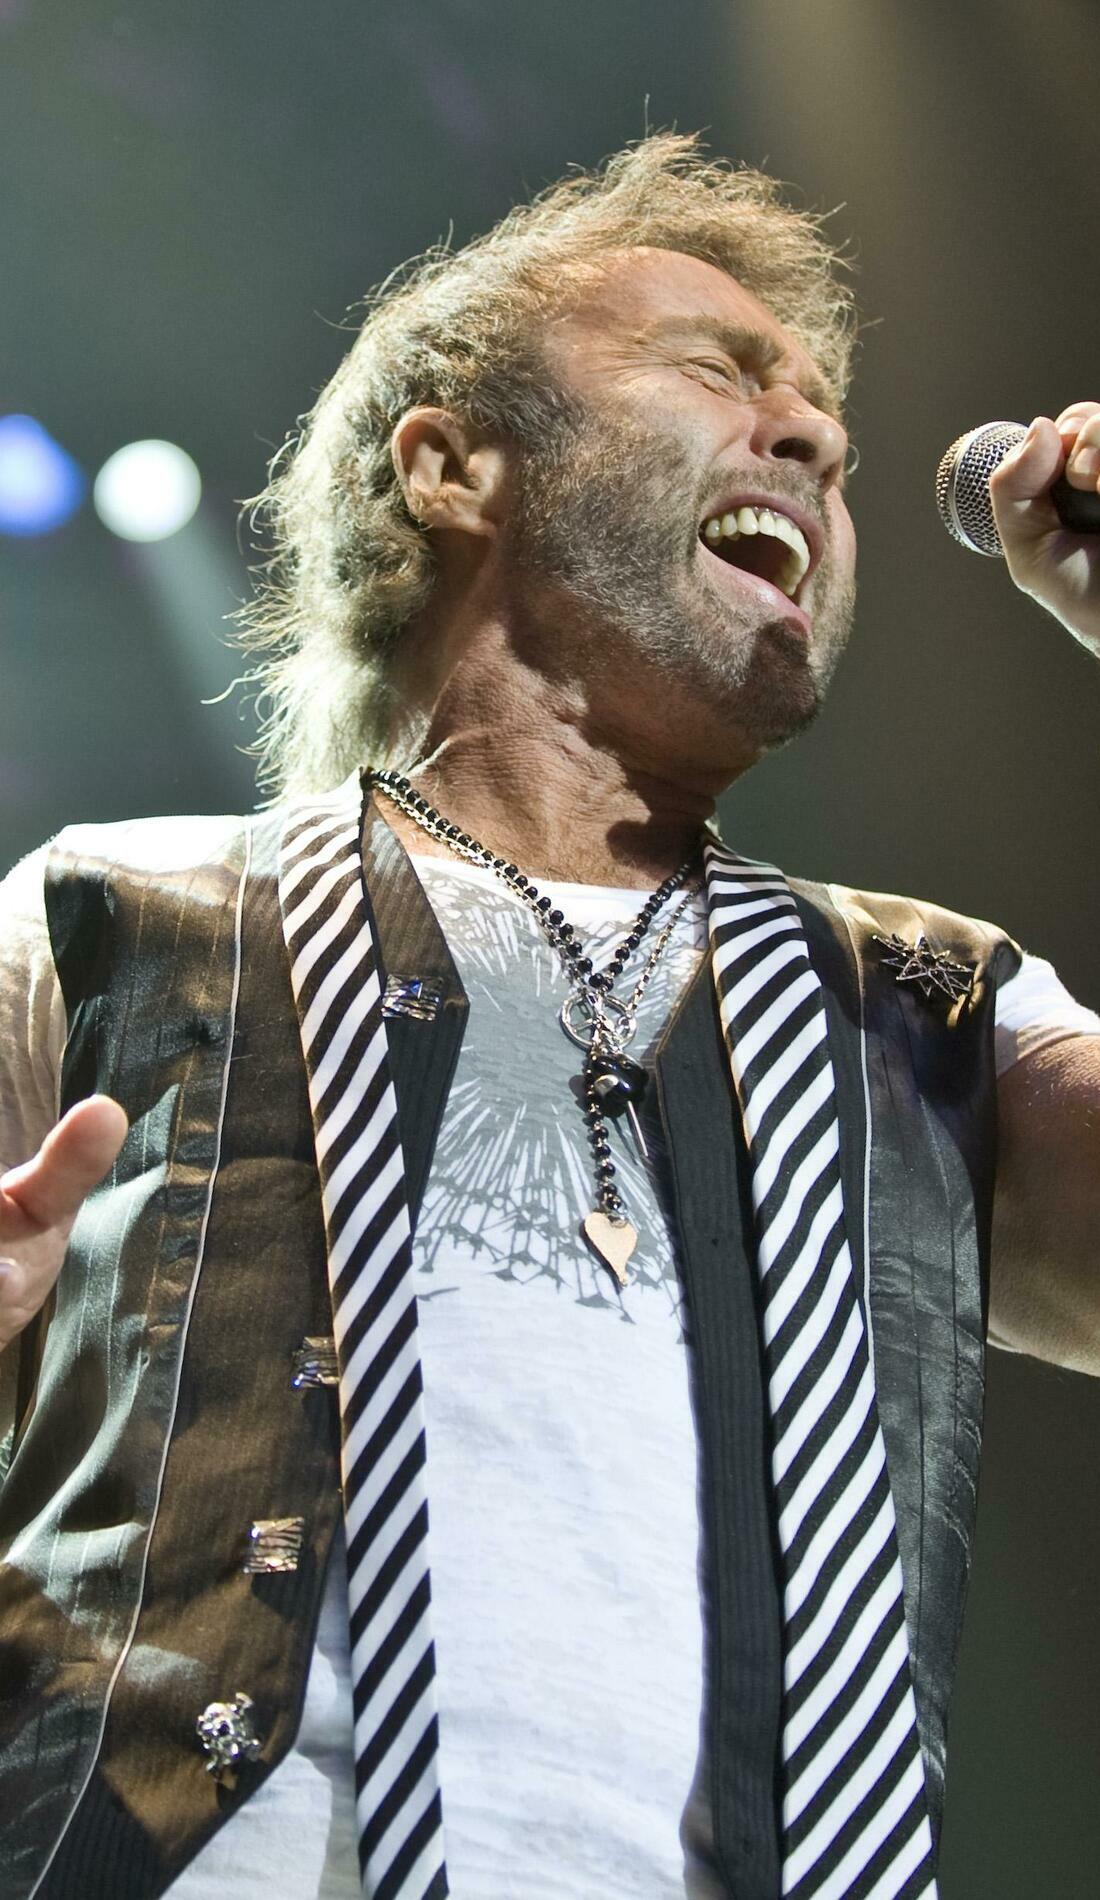 A Paul Rodgers live event